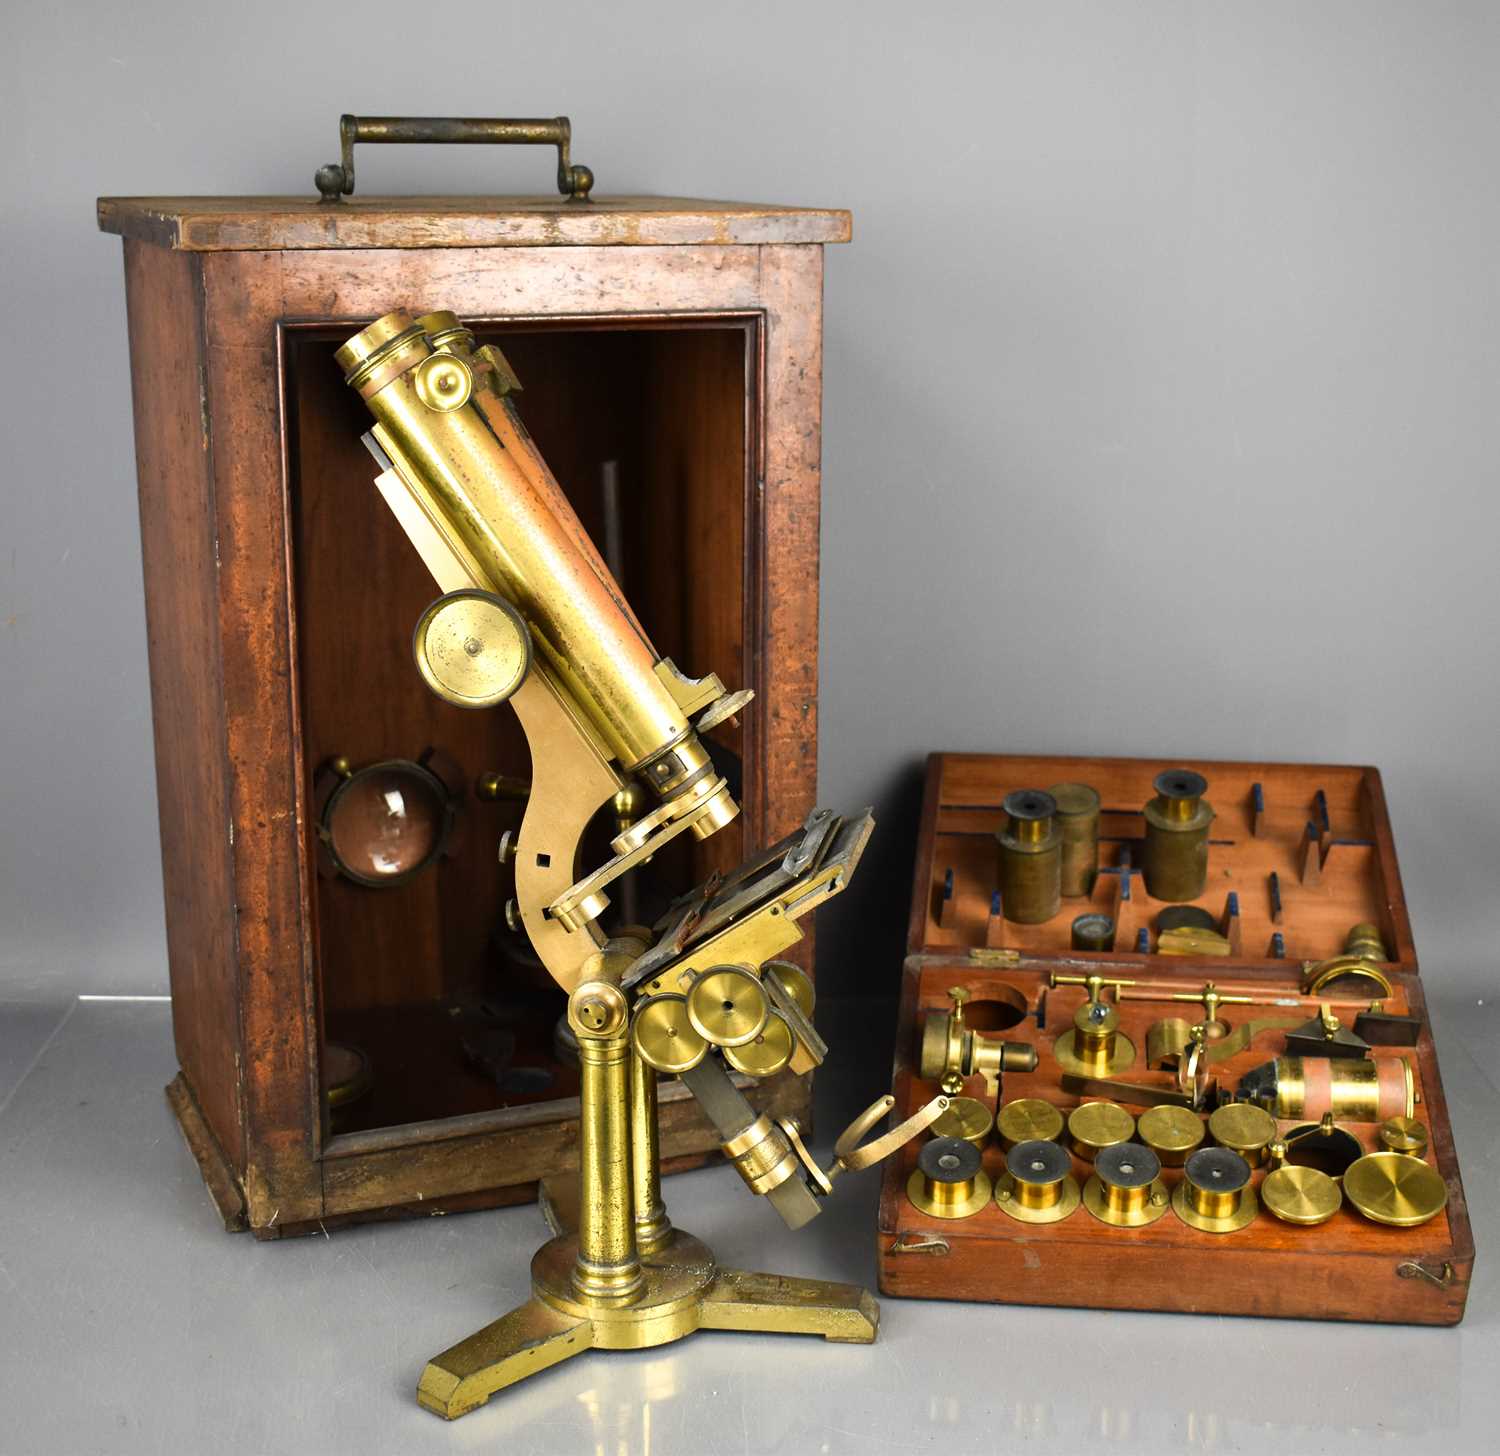 A 19th century Smith & Beck binocular Microscope in a mahogany case, the case holding a large